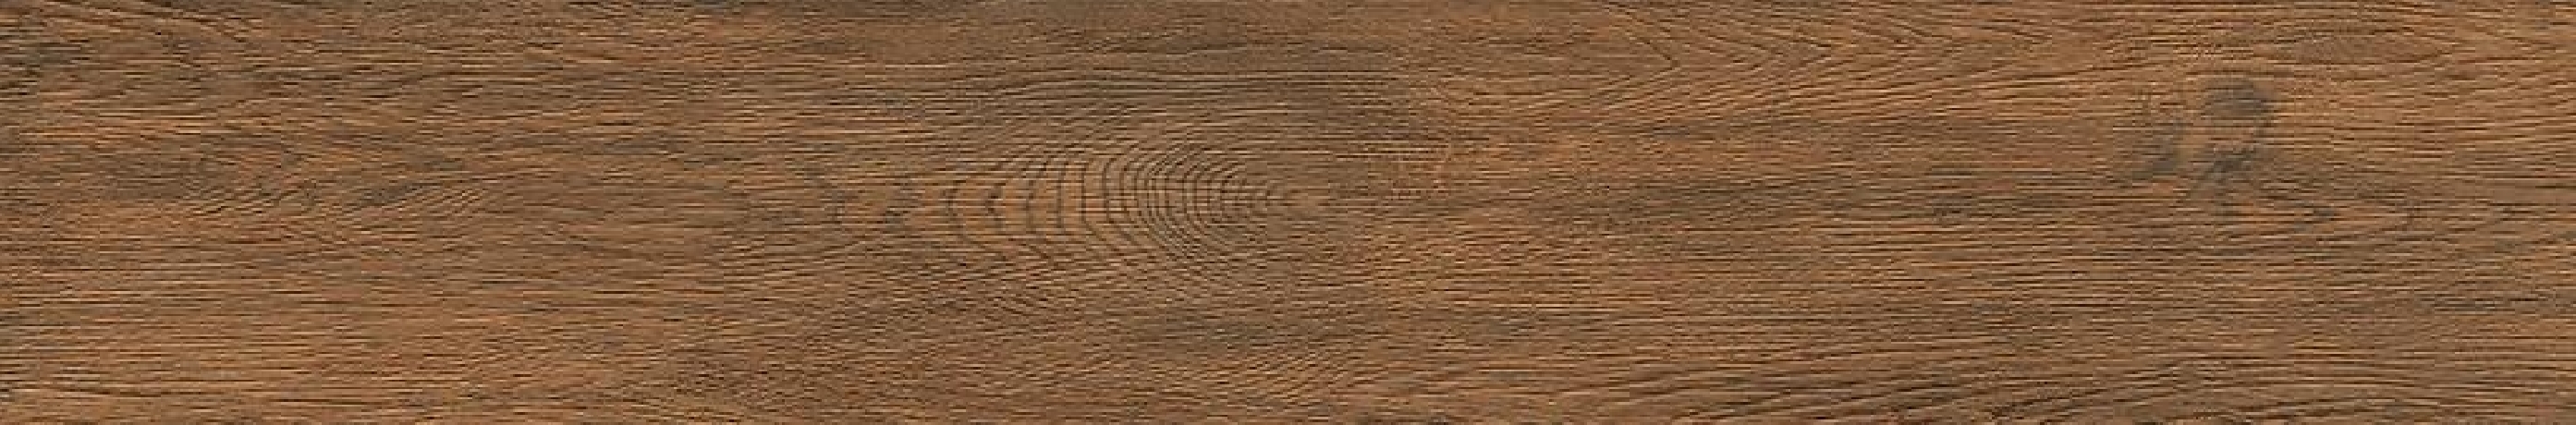 Opoczno Grand Wood Prime Brown OP498-015-1